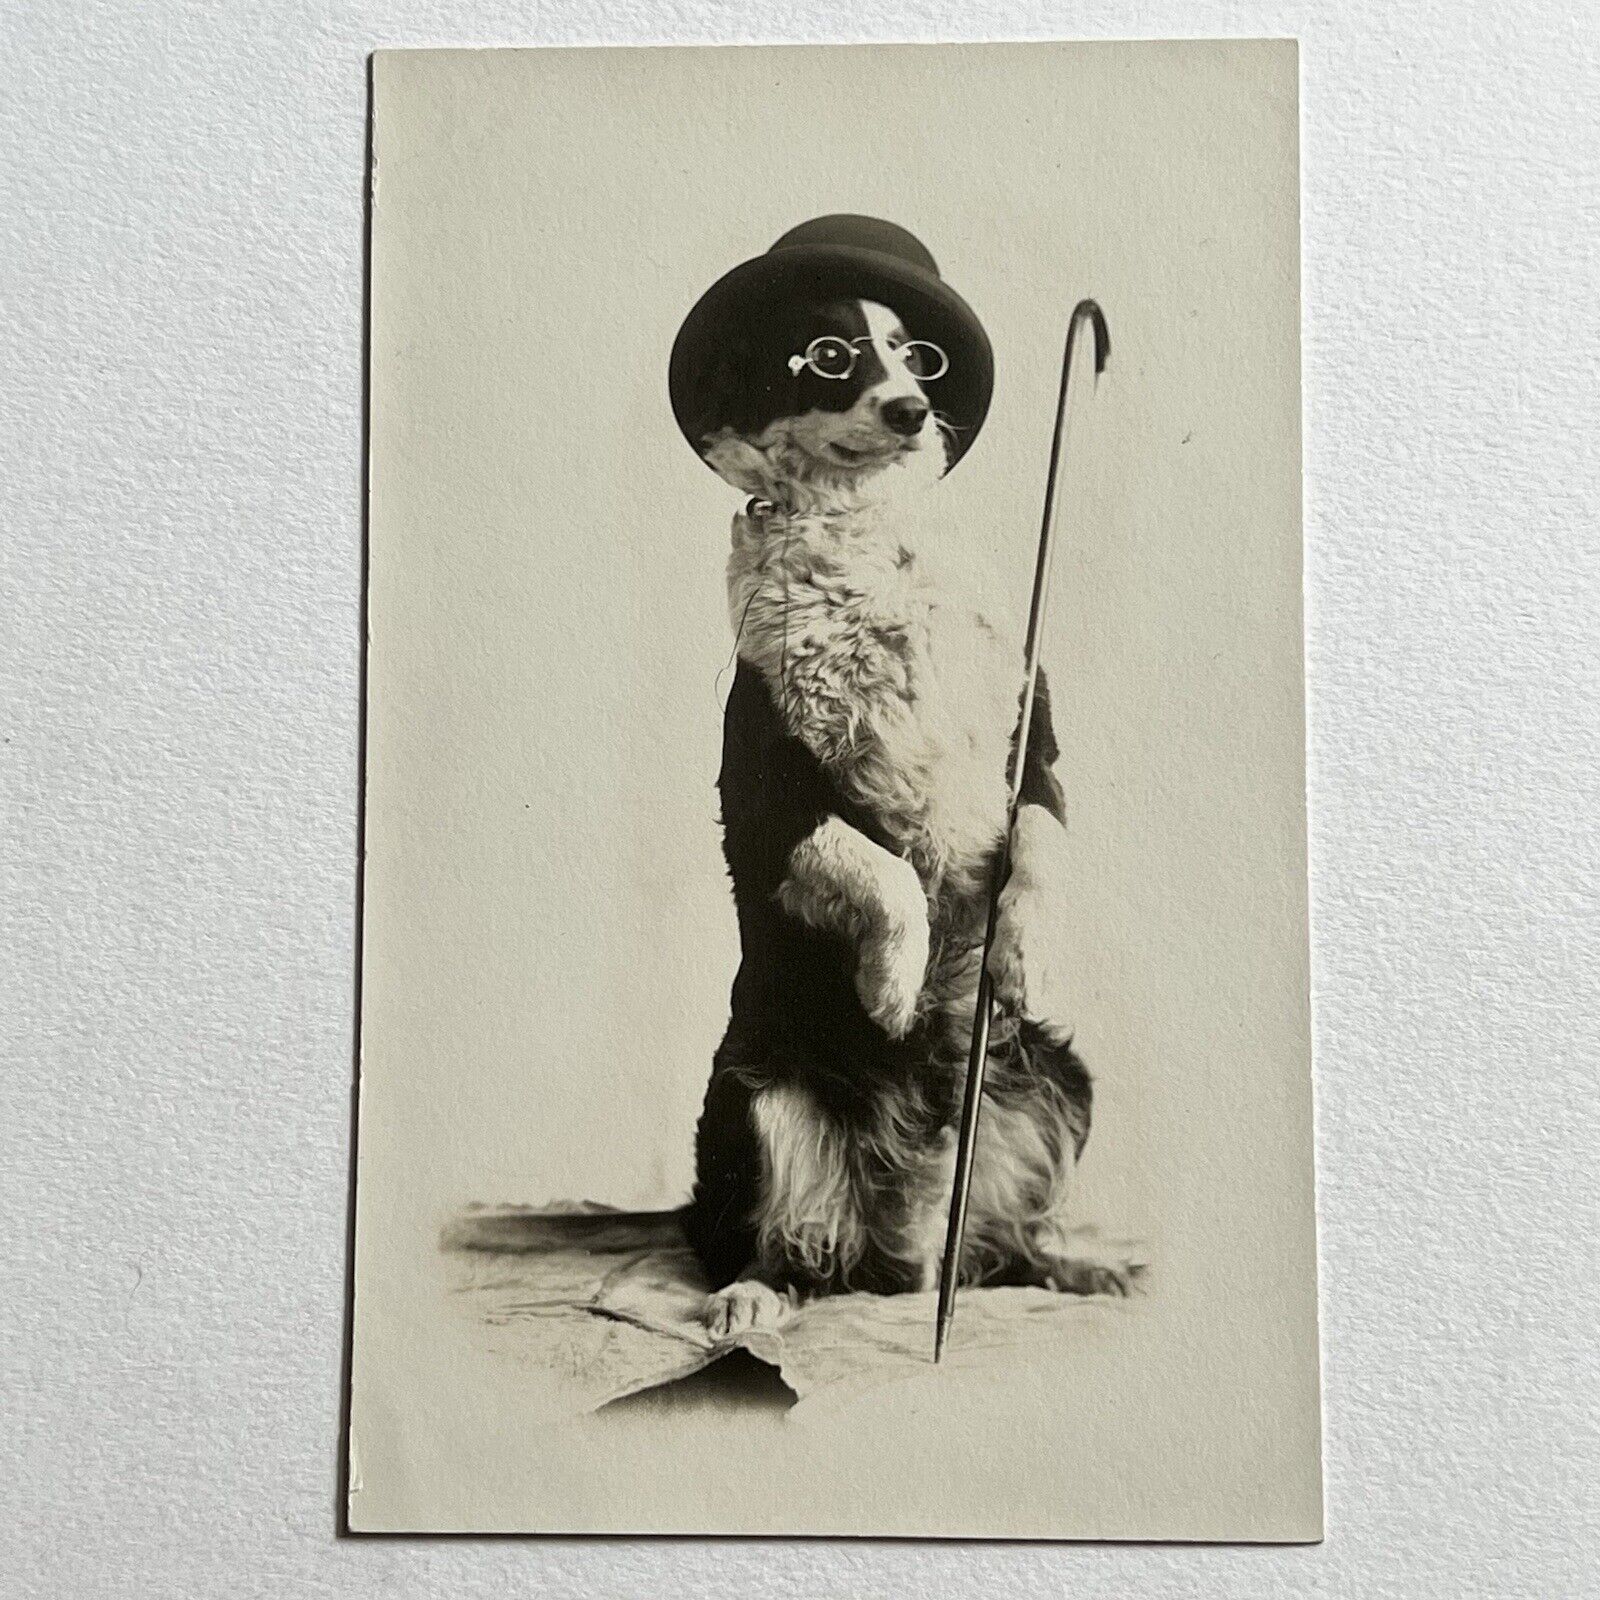 Antique RPPC Real Photograph Postcard Dog Doing Trick With Hat Cane & Glasses